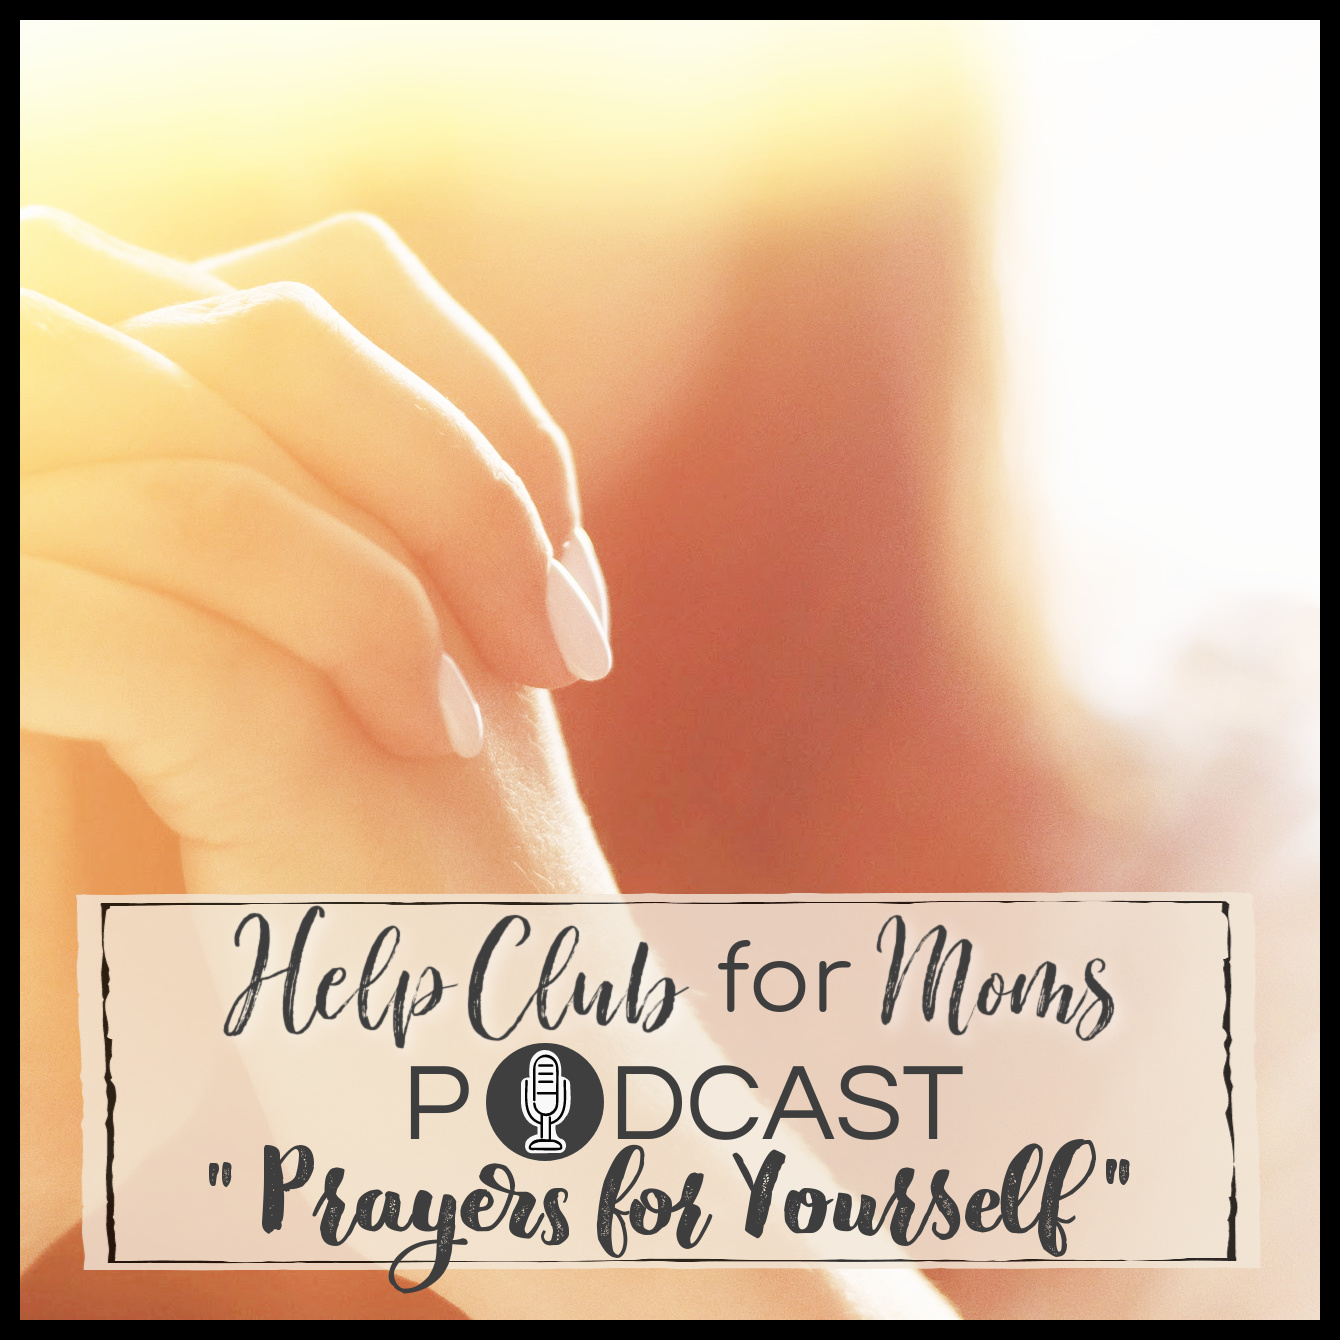 Monday Prayers for Yourself- Podcast